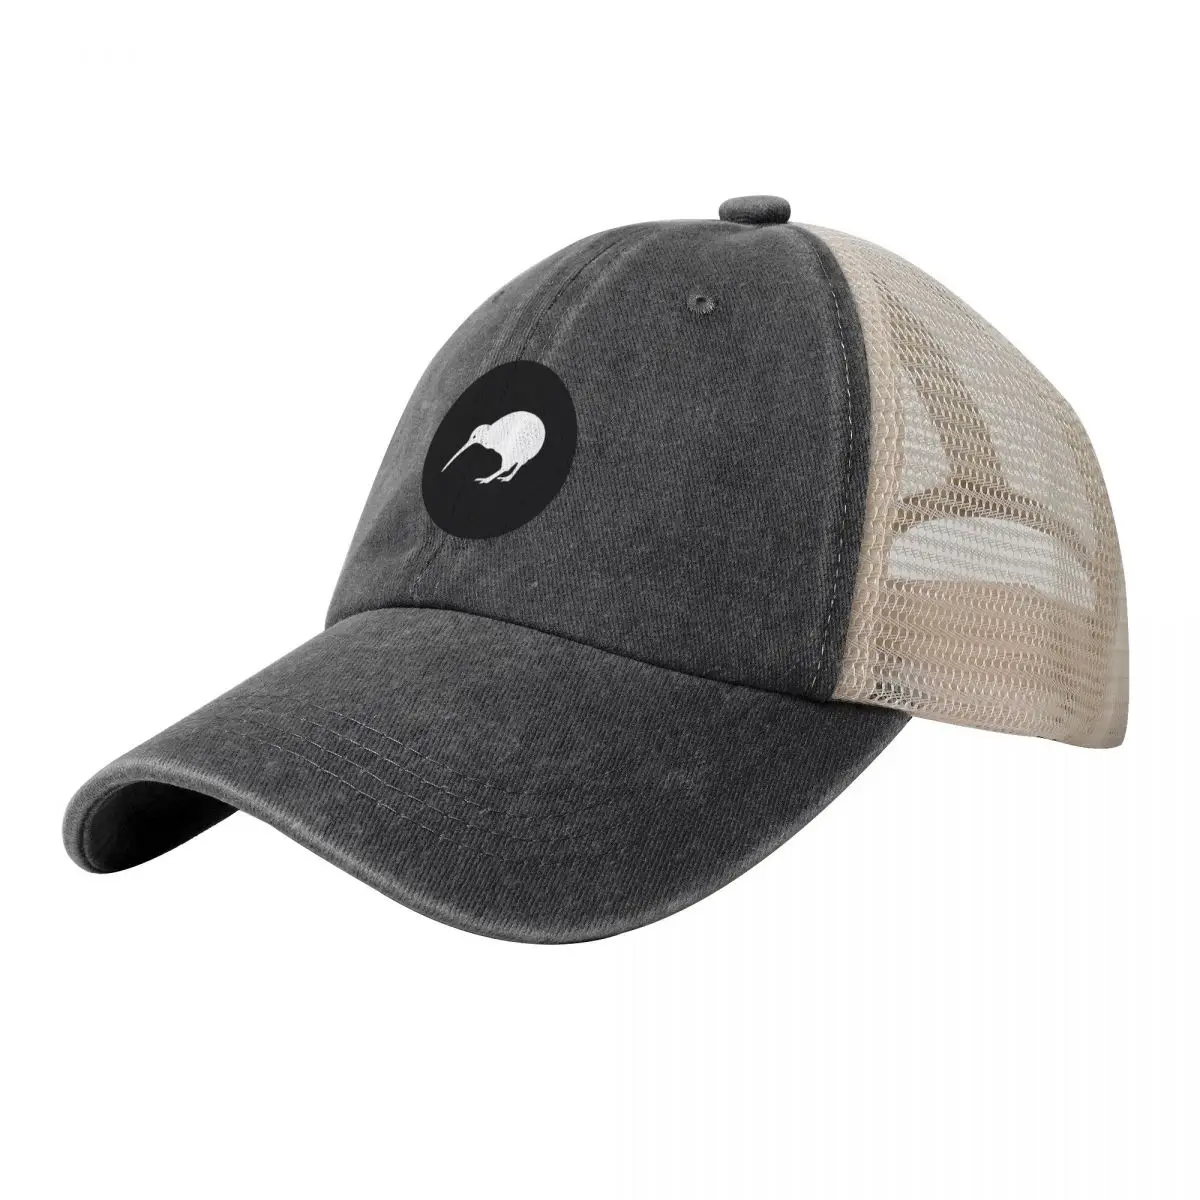 

NEW ZEALAND DEFENCE FORCE ROUNDEL Cowboy Mesh Baseball Cap Cosplay Beach Outing |-F-| Luxury Brand Ladies Men's